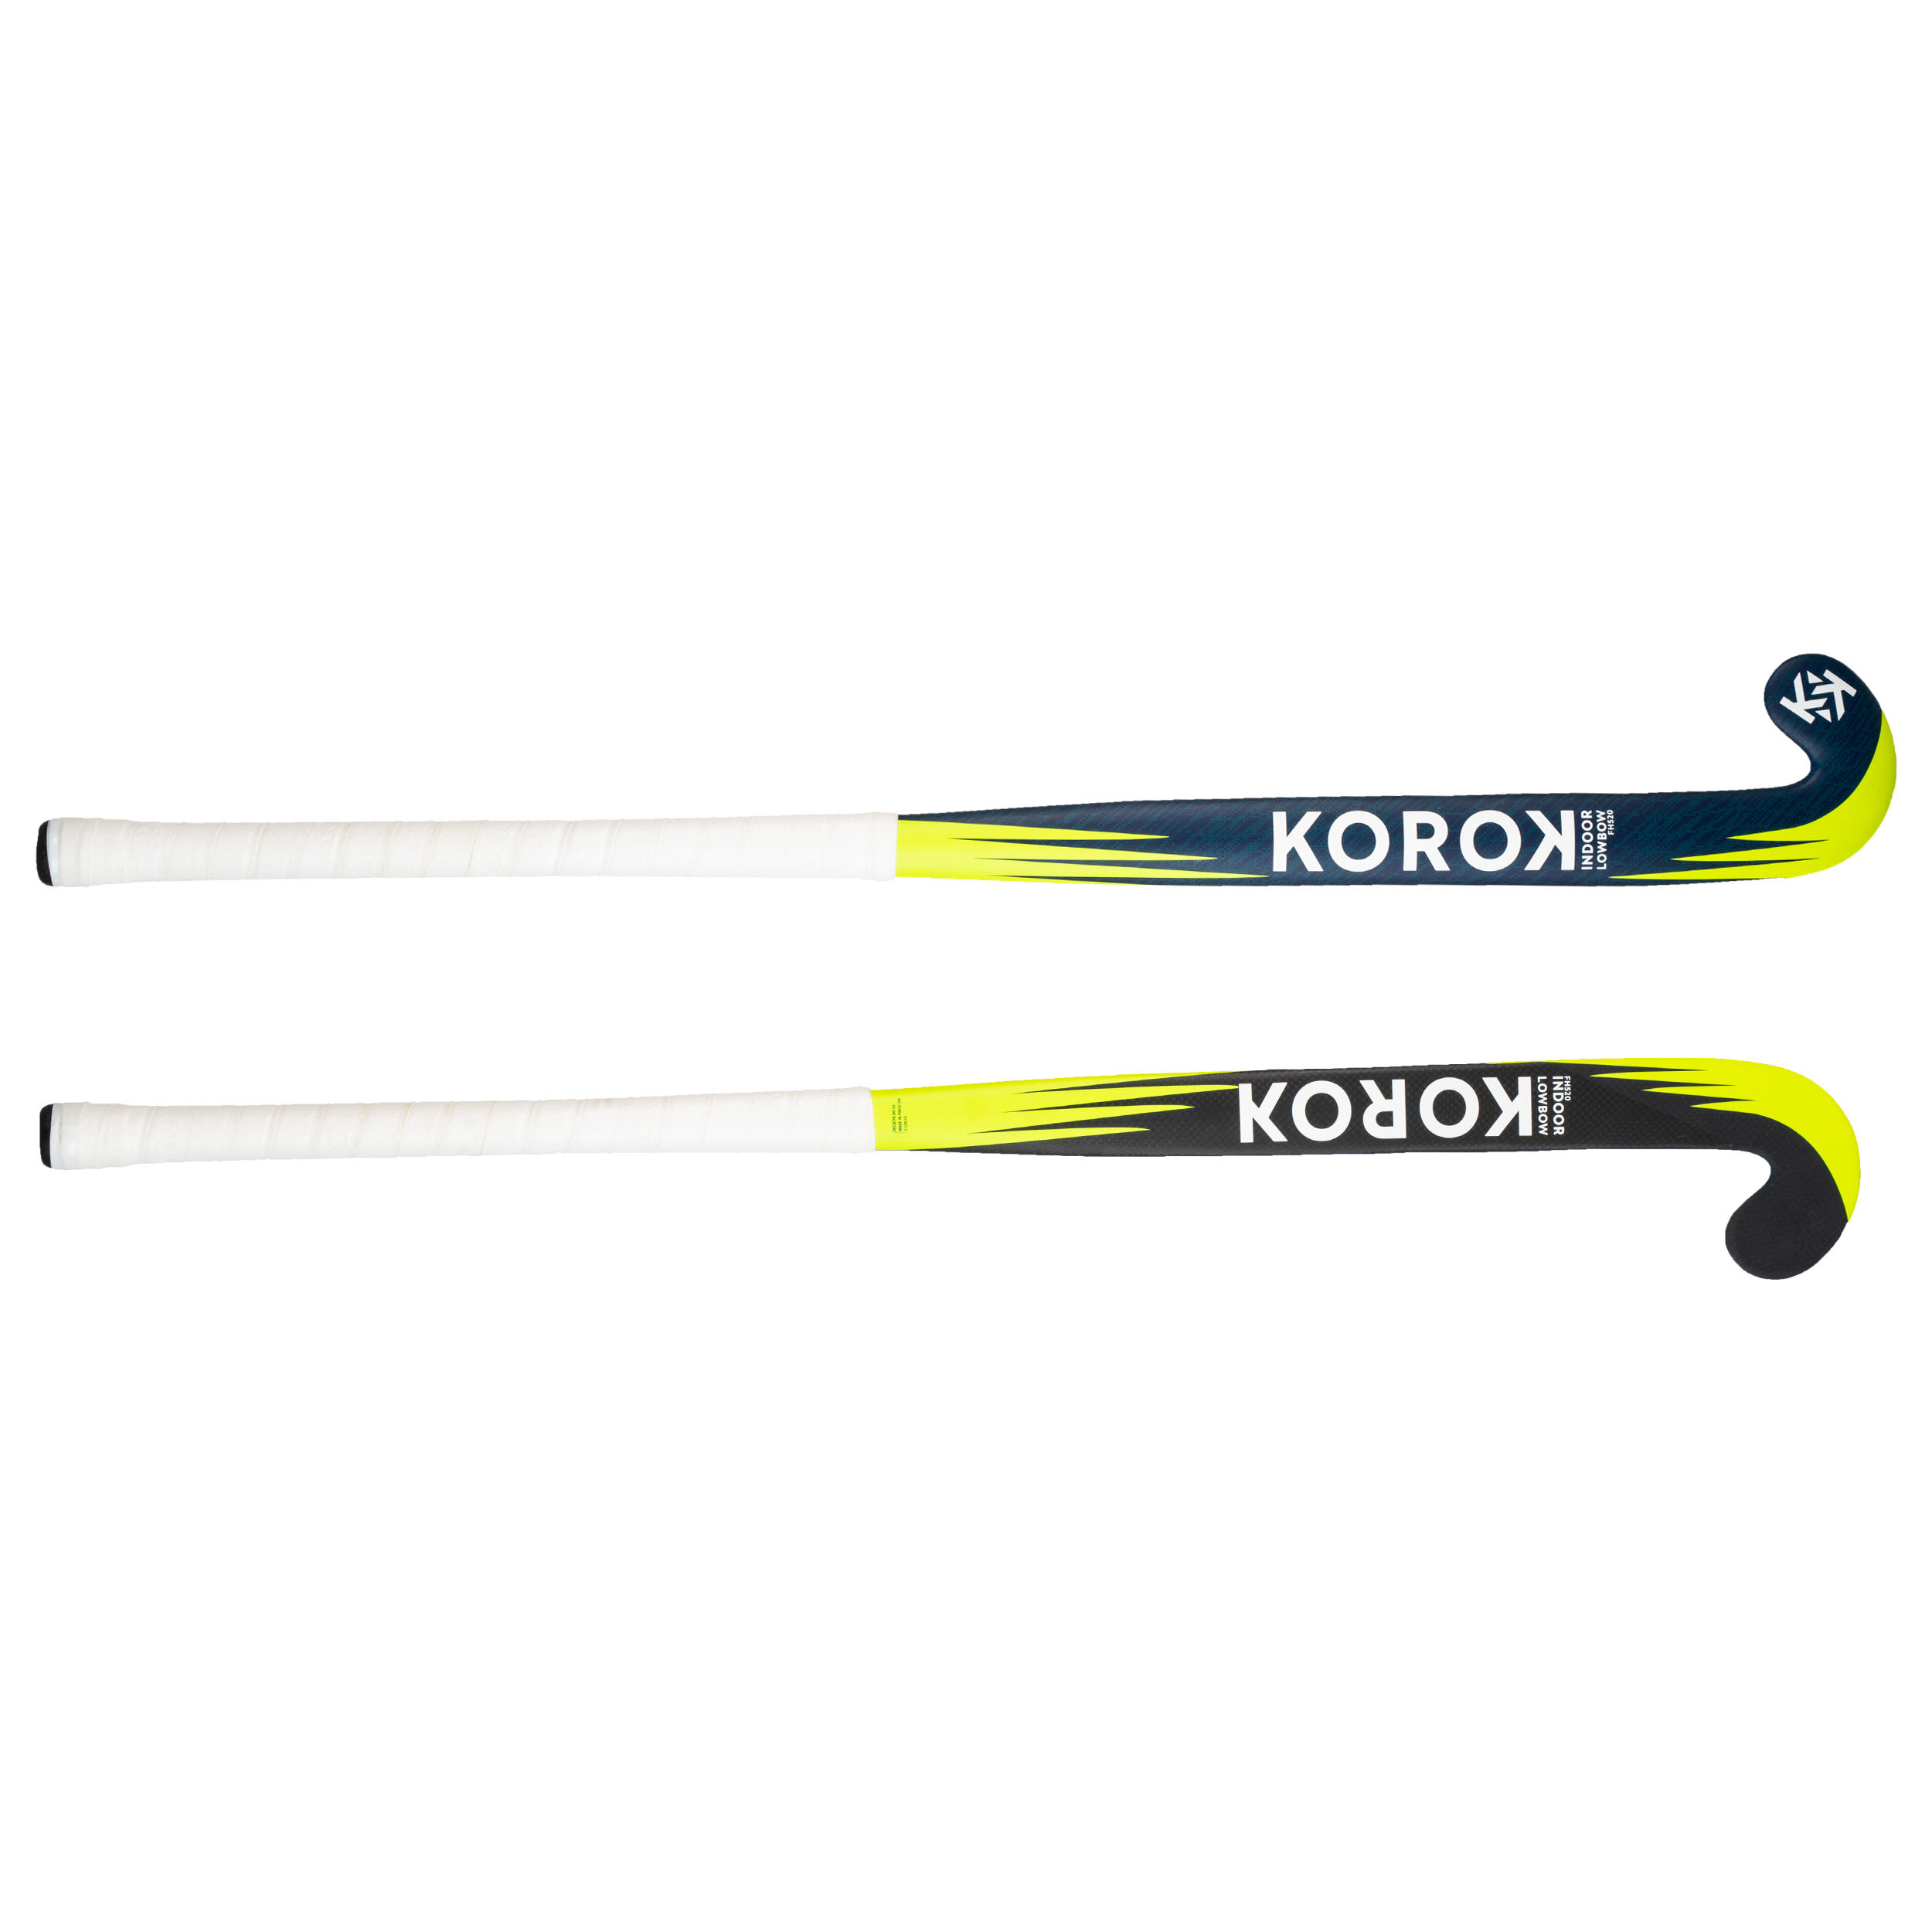 Adult Intermediate 20% Carbon Low Bow Indoor Hockey Stick FH520 - Blue/Yellow 3/10